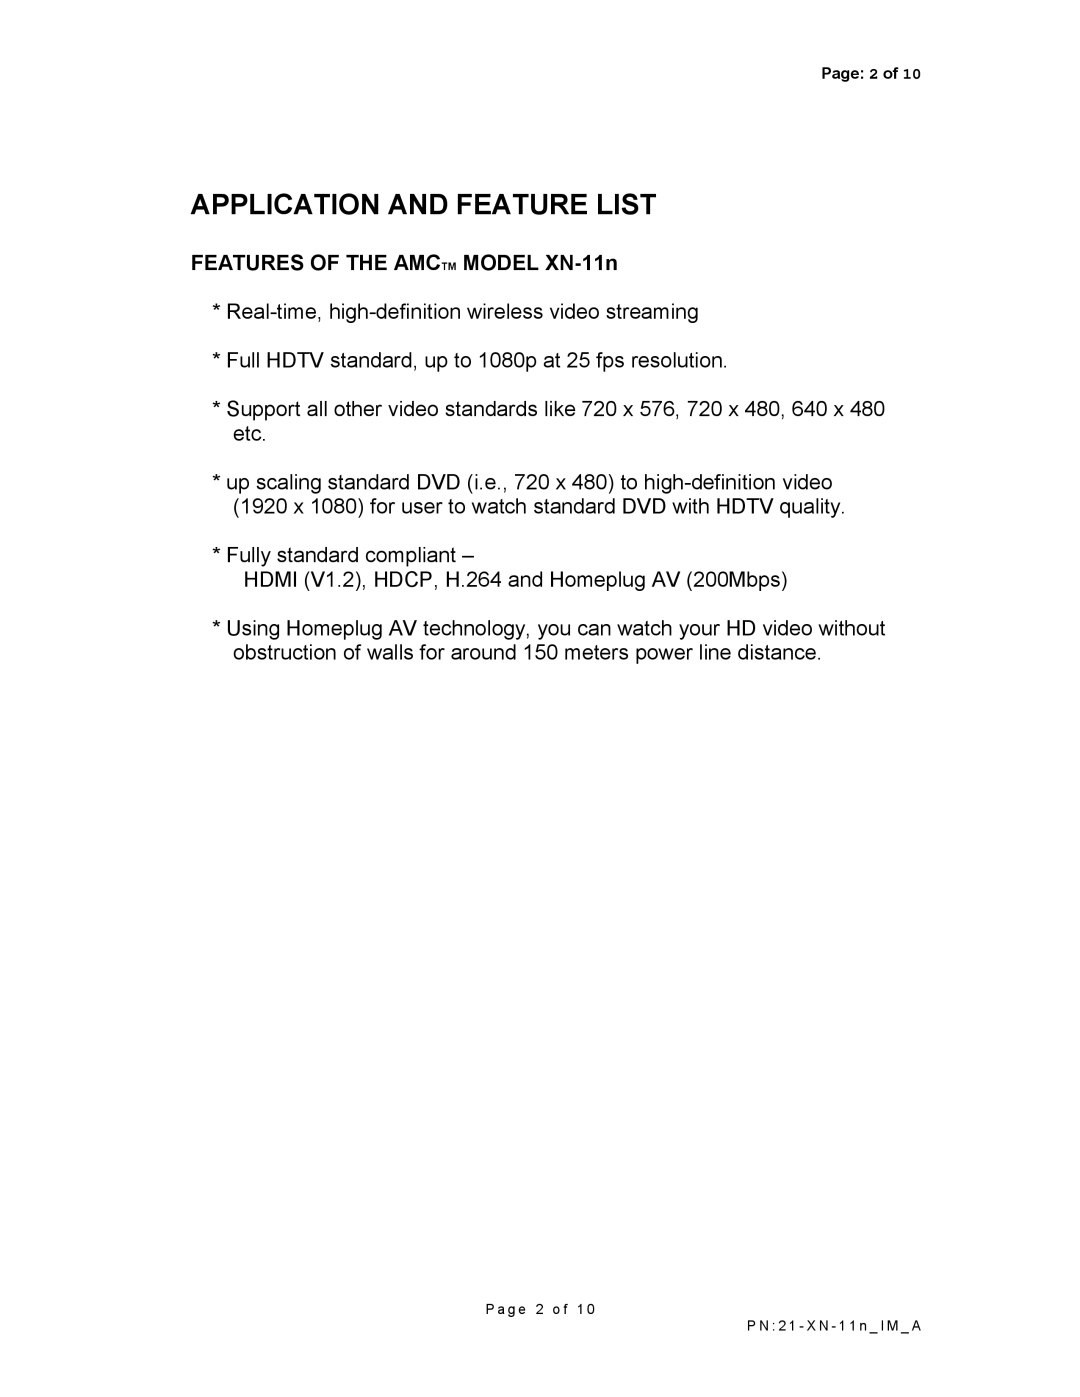 AMC manual Application And Feature List, FEATURES OF THE AMCTM MODEL XN-11n 